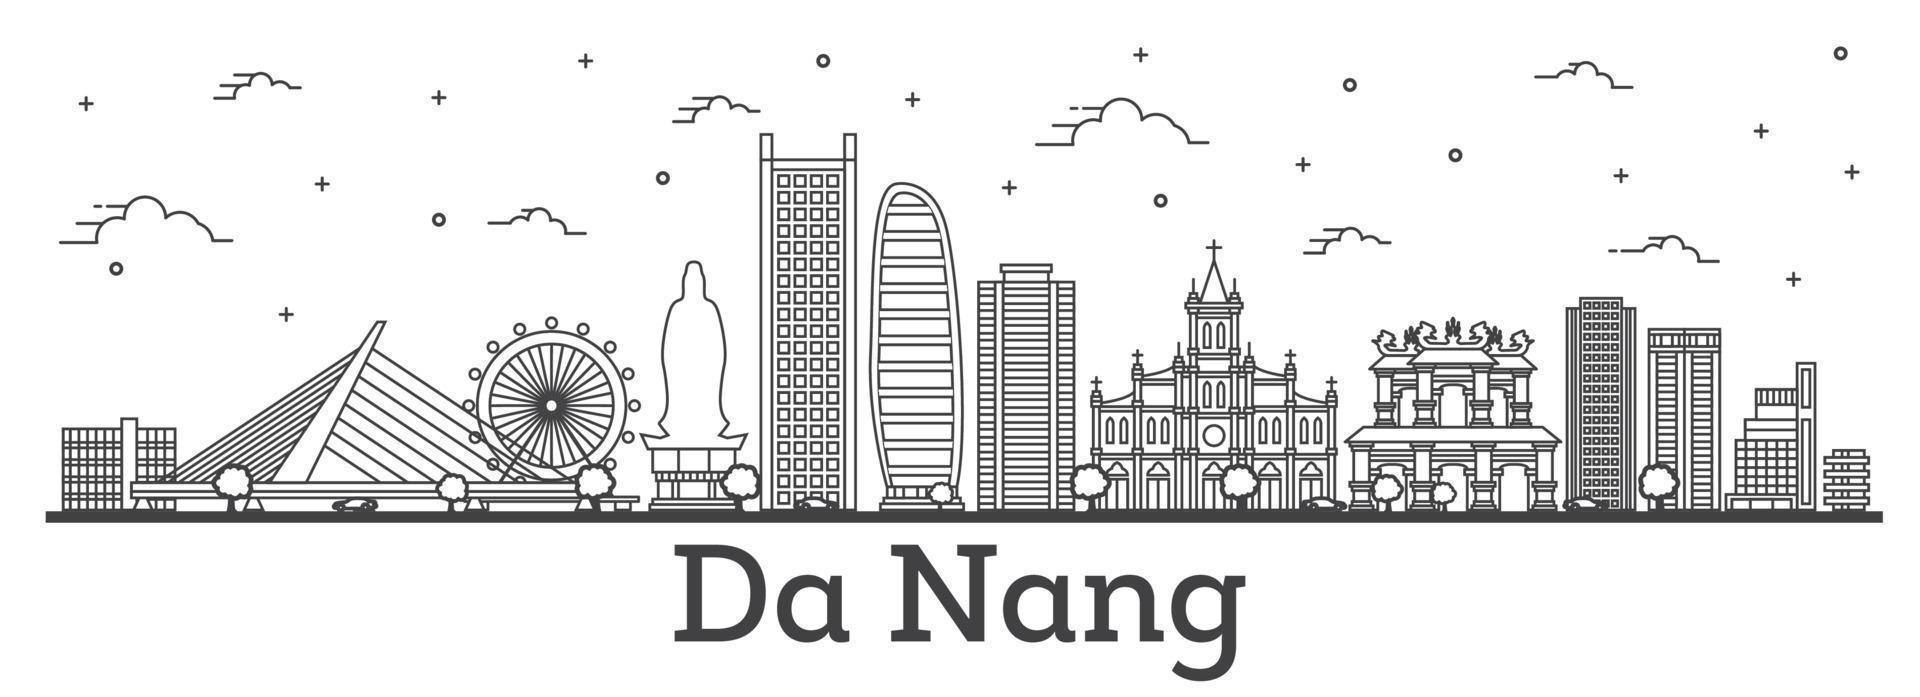 Outline Da Nang Vietnam City Skyline with Historic Buildings Isolated on White. vector